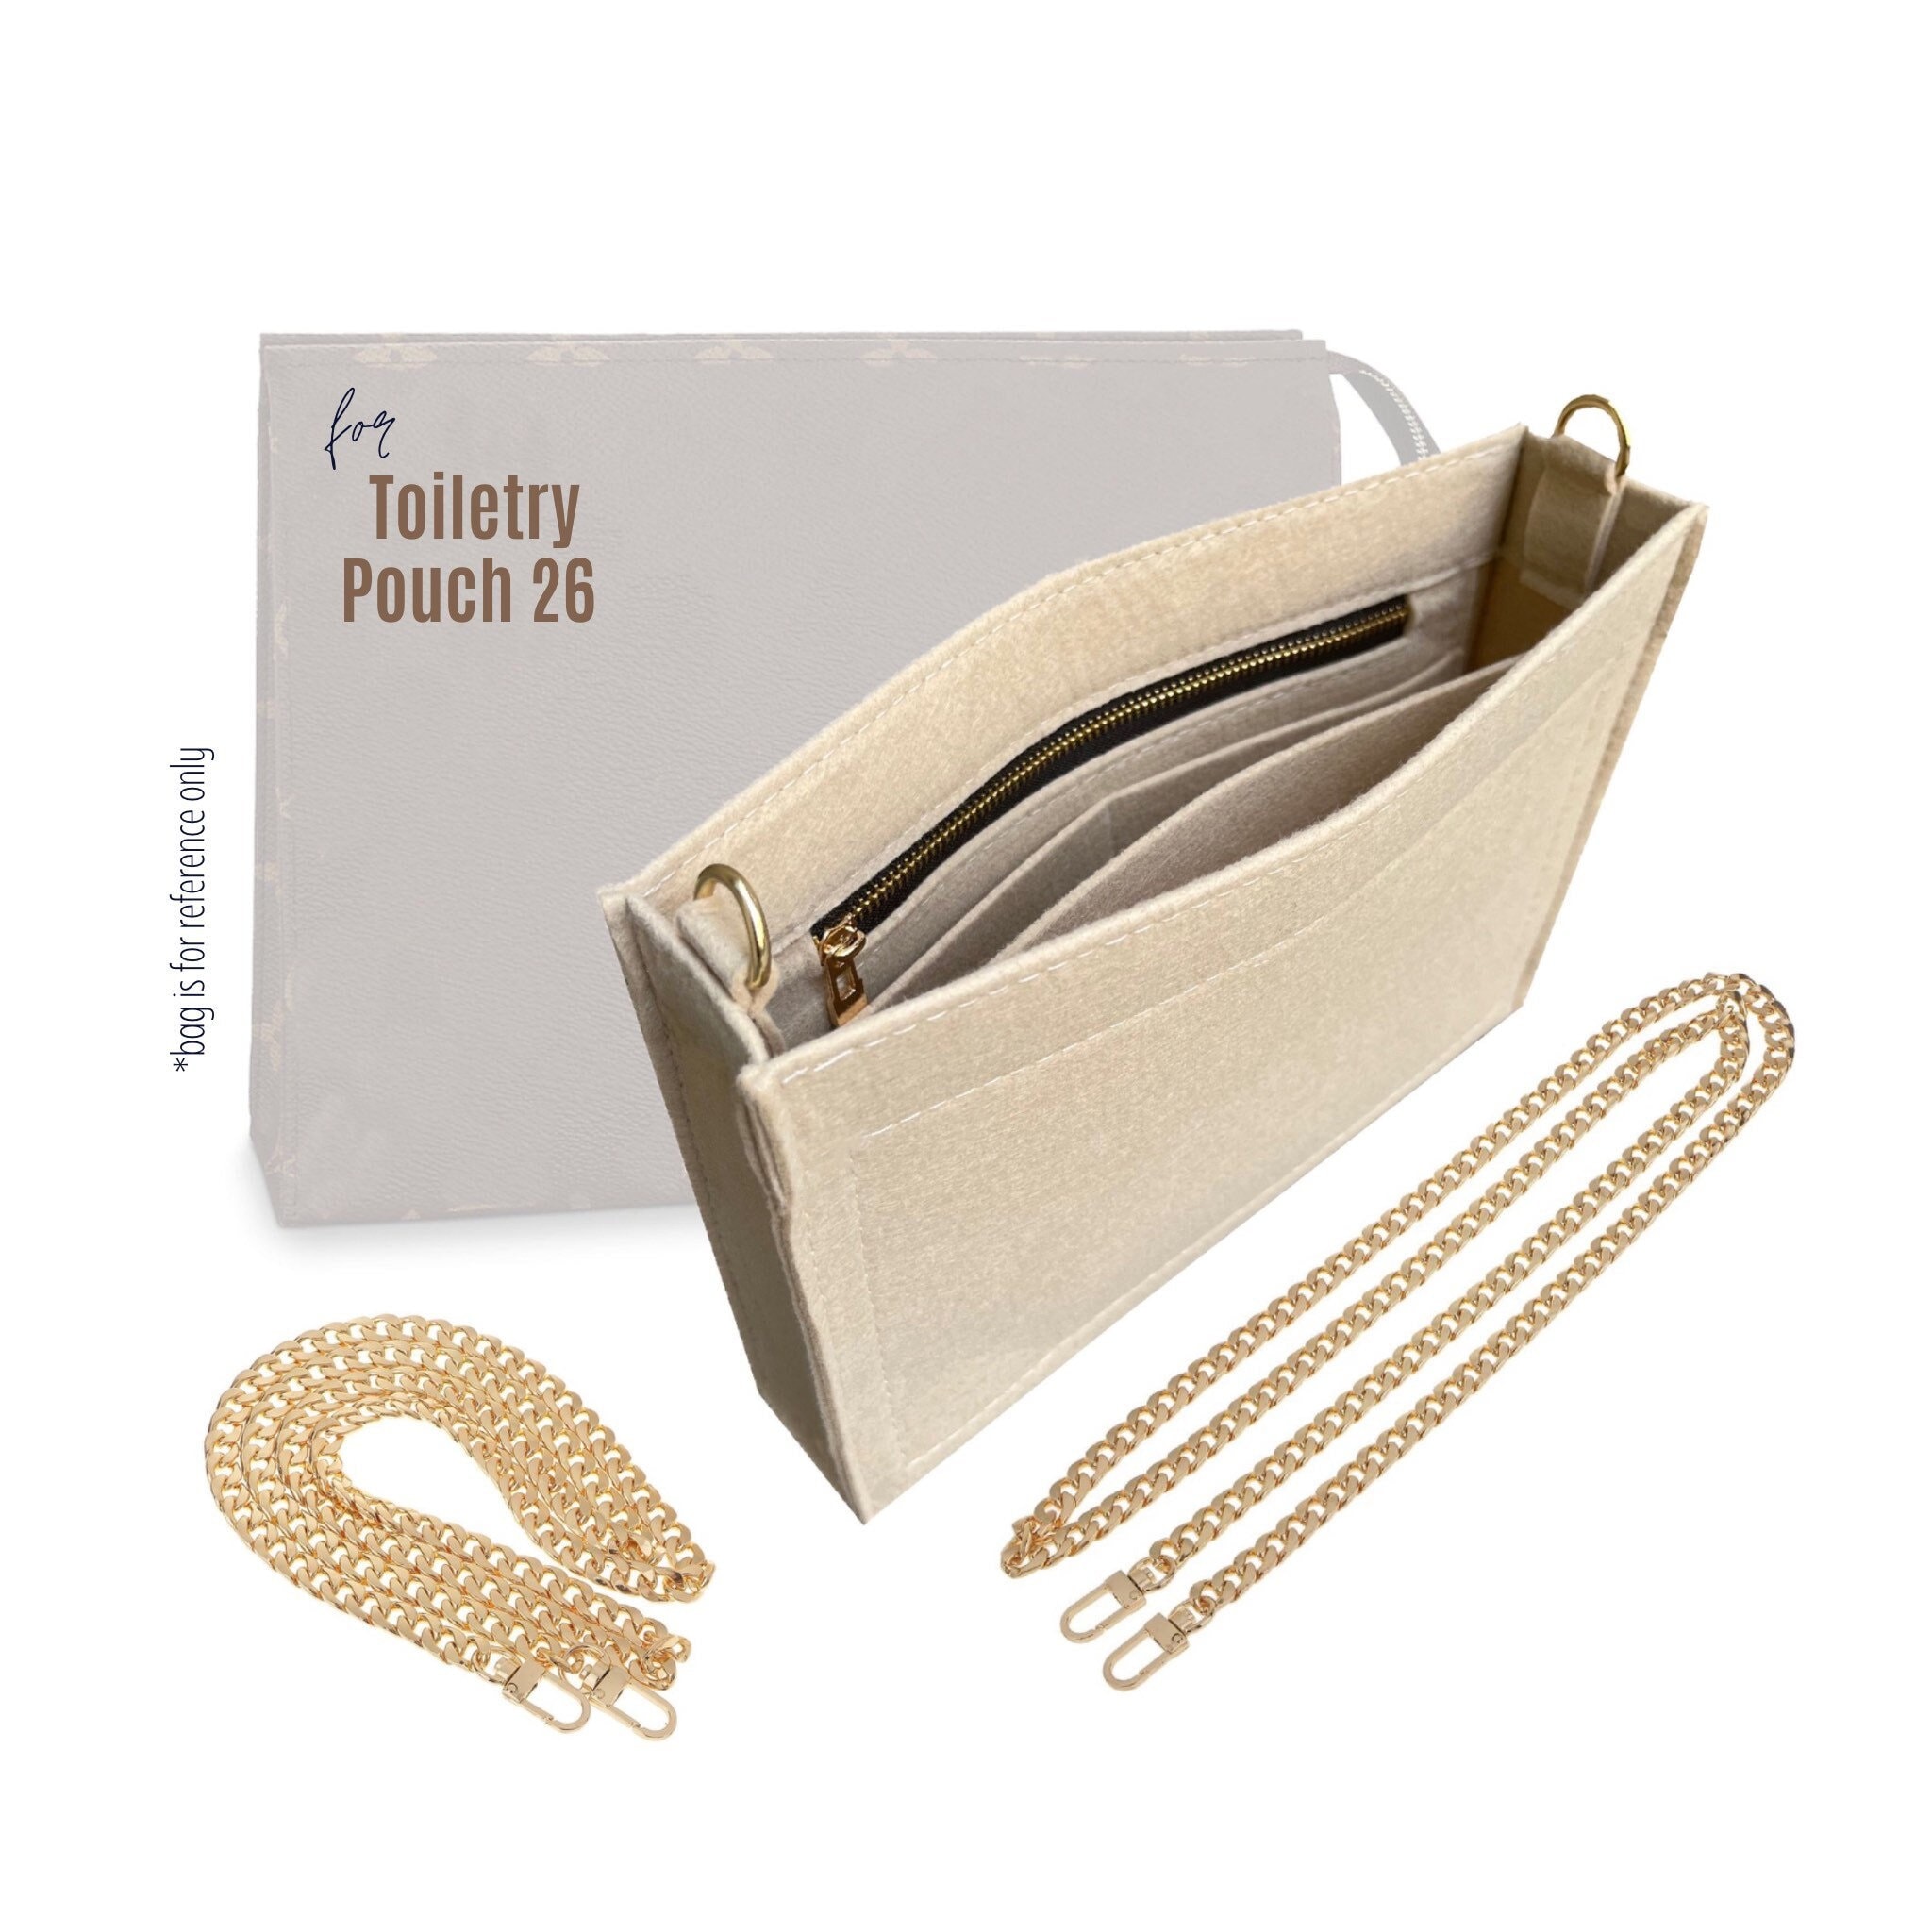 Toiletry Pouch 26 Conversion Kit With Chain / Insert to 